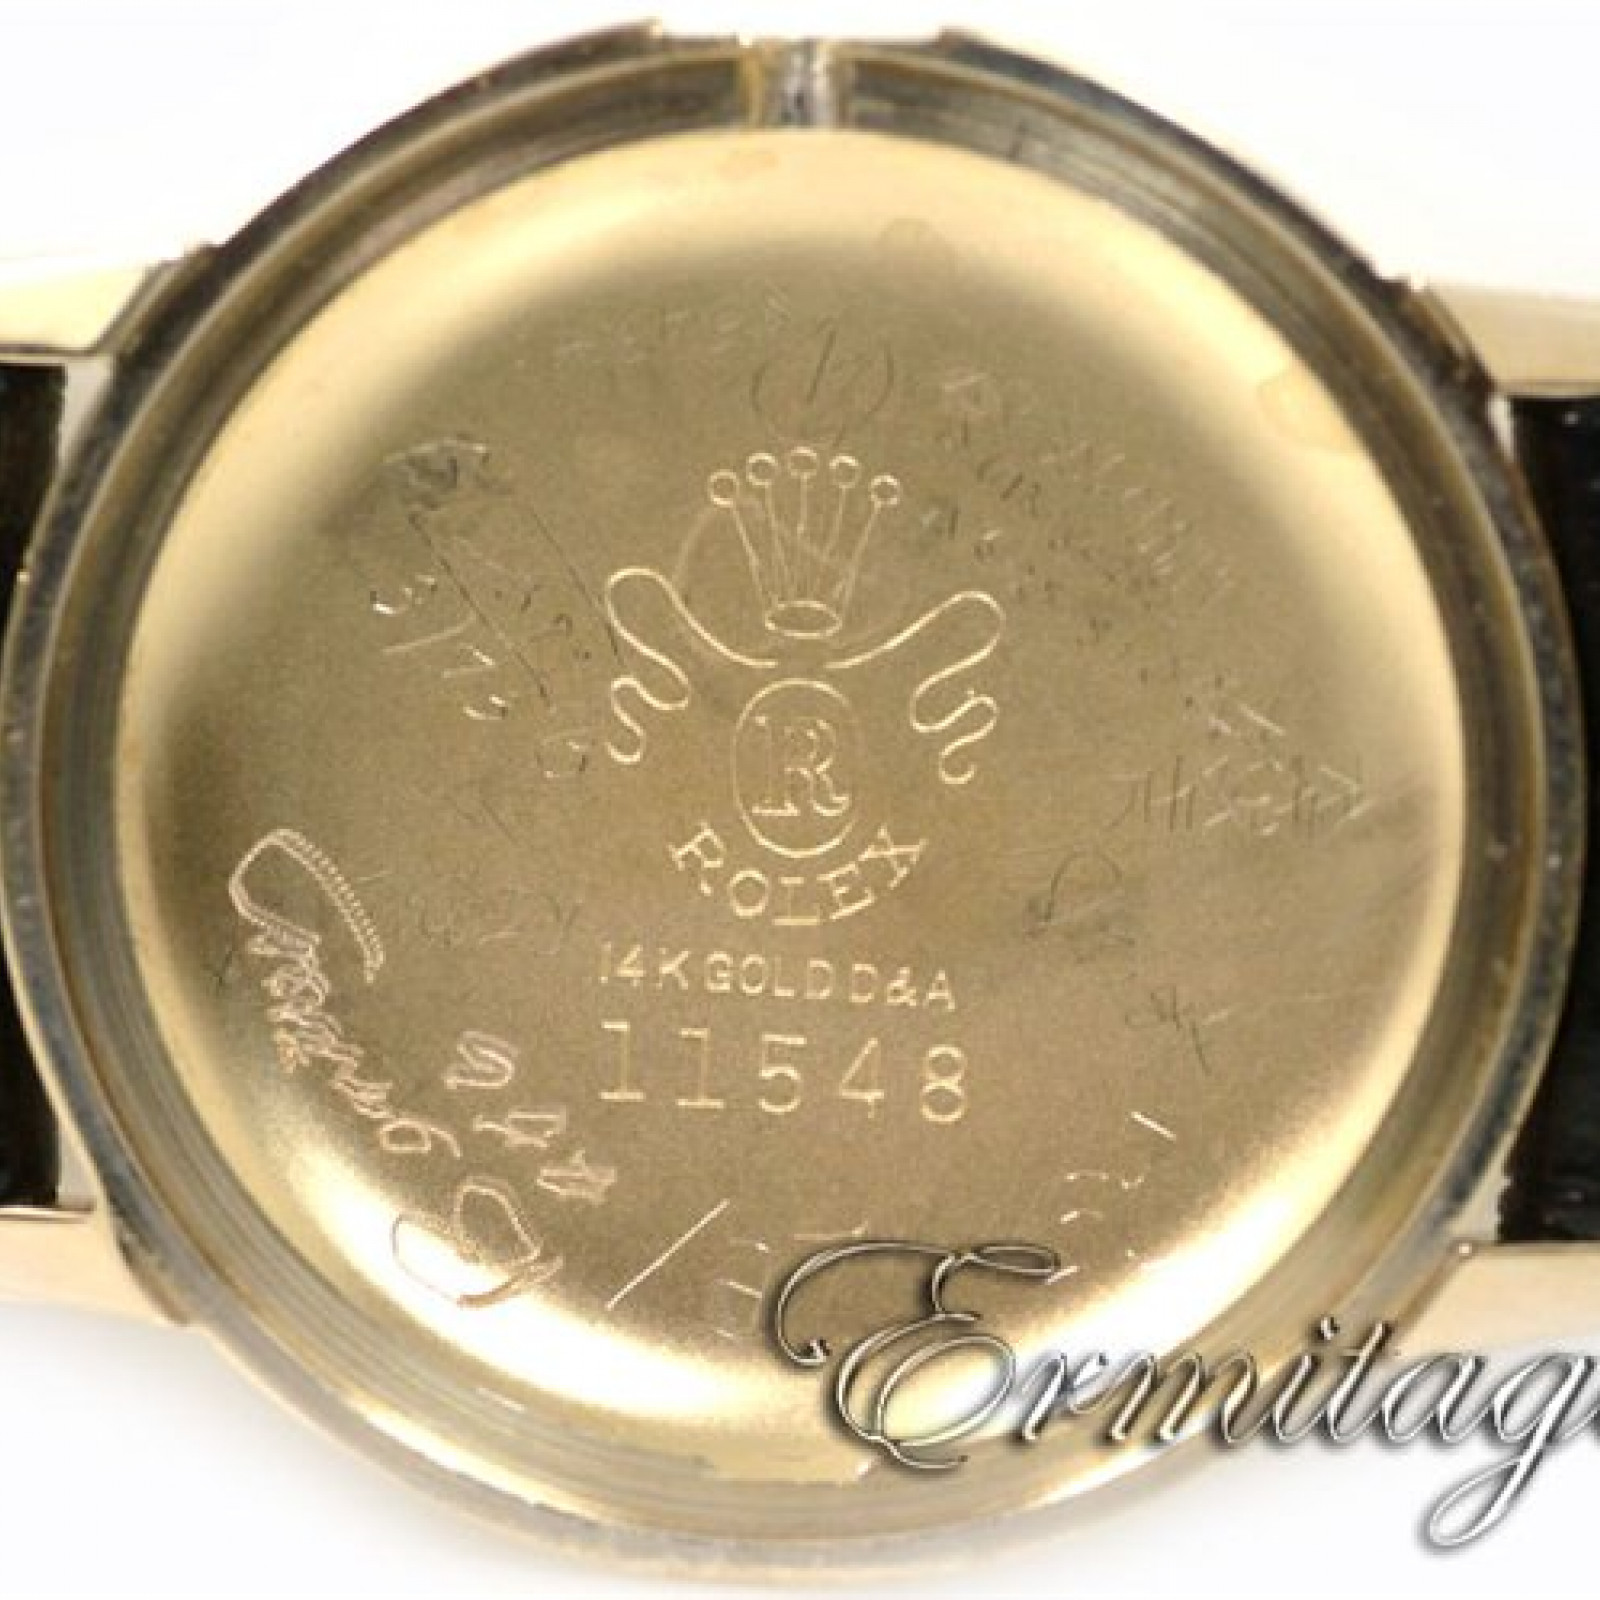 Rolex Oyster Perpetual 11548 Gold